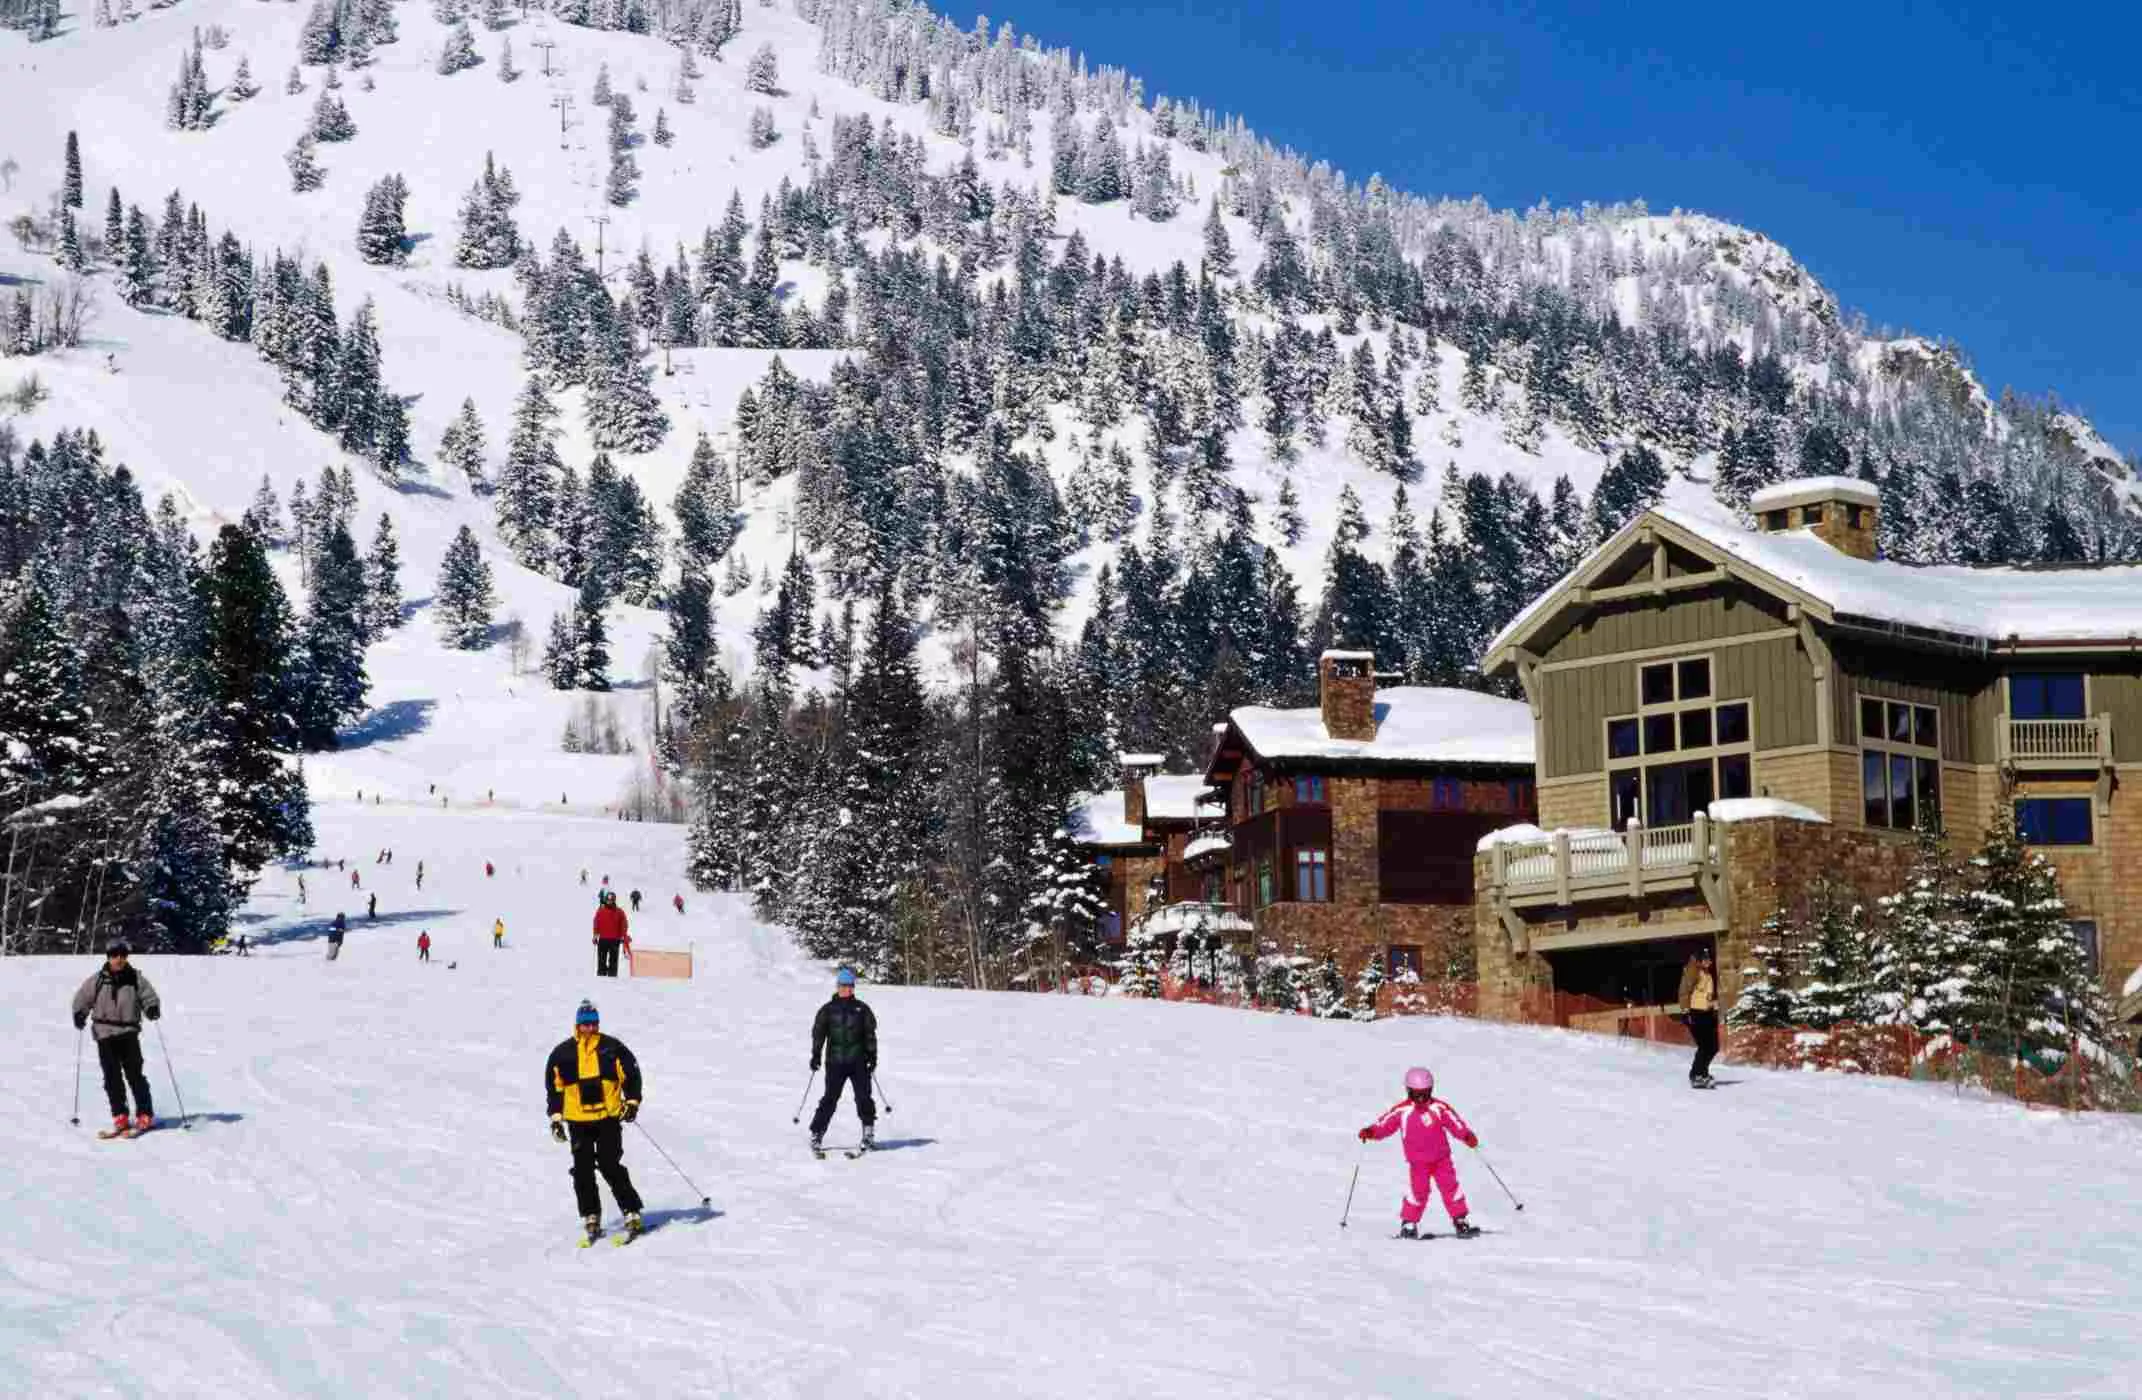 Bosques de Monterreal in Mexico, North America | Snowboarding,Skiing - Rated 4.4